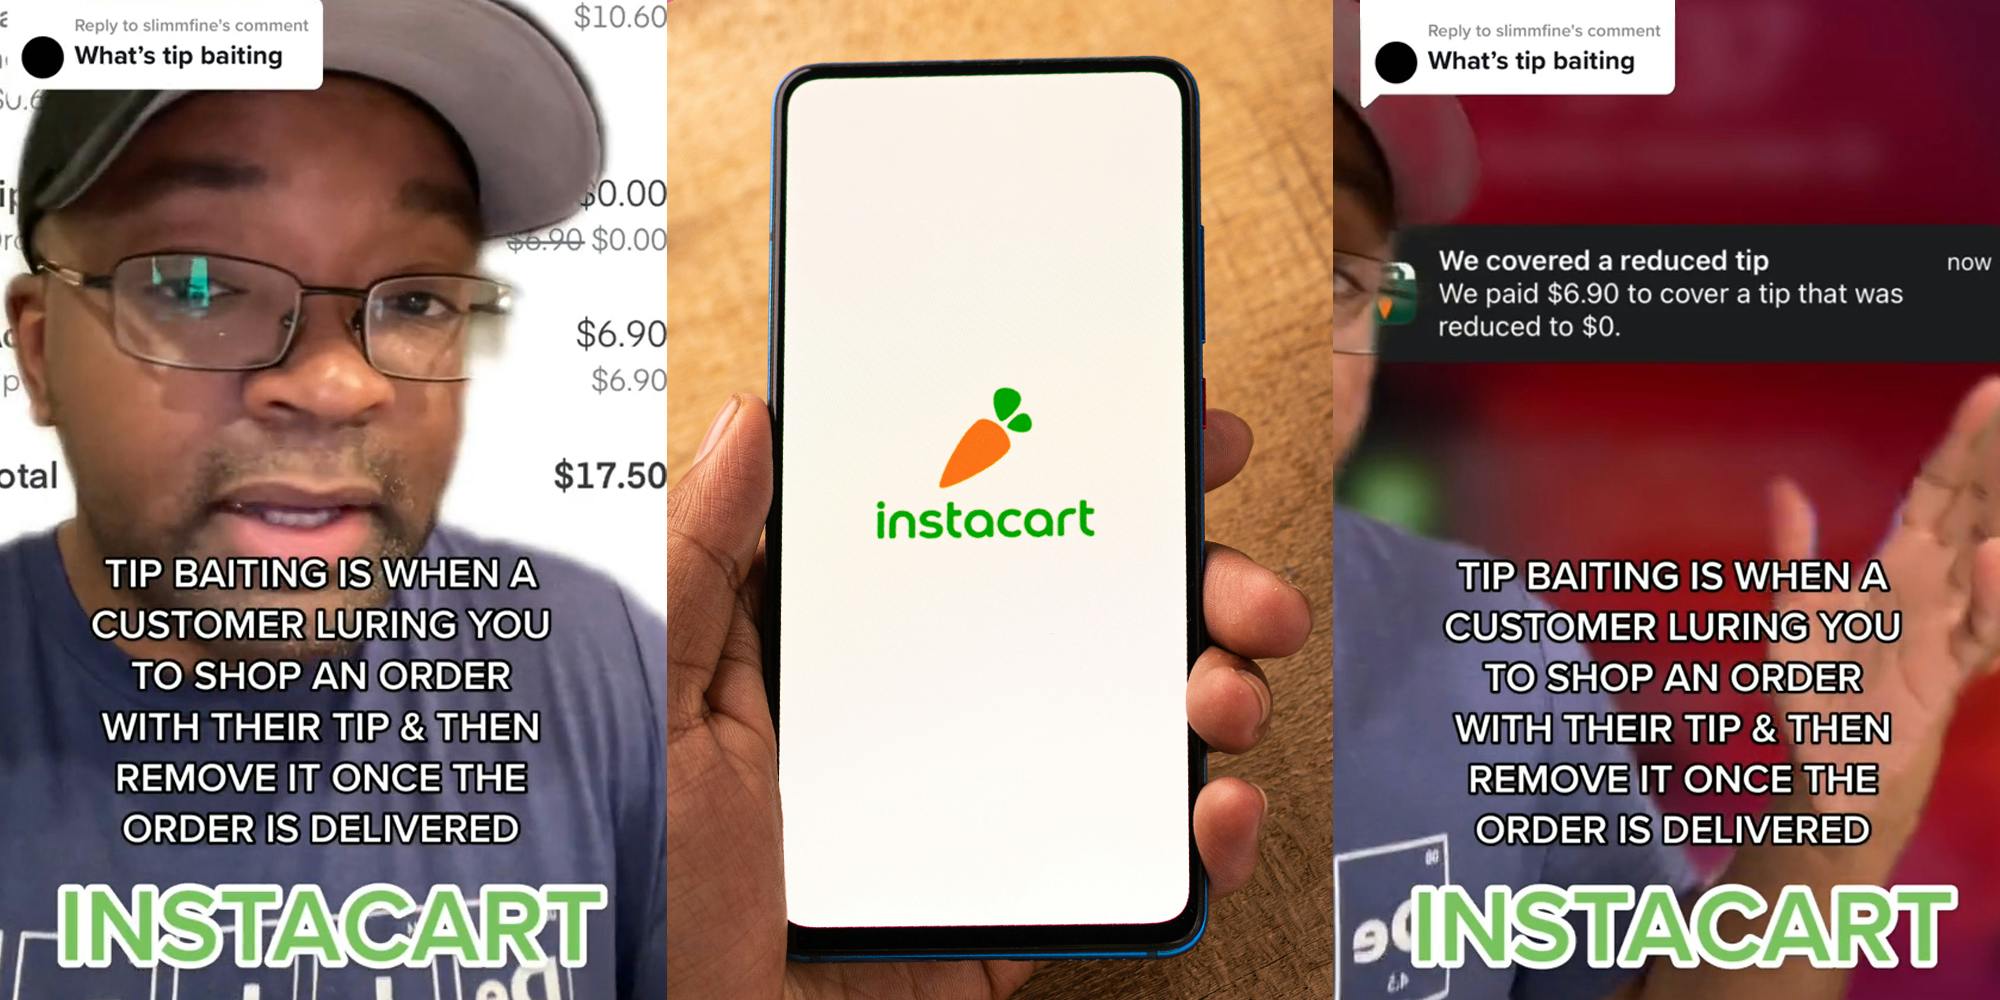 Instacart shopper greenscreen TikTok over Instacart pay caption "what's tip baiting" "TIP BAITING IS WHEN A CUSTOMER LURING YOU TO SHOP AN ORDER WITH THEIR TIP & THEN REMOVE IT ONCE THE ORDER IS DELIVERED INSTACART" (l) Instacart on phone in hand in front of tan background (c) Instacart shopper greenscreen TikTok over Instacart reduced tip pay caption "what's tip baiting" "TIP BAITING IS WHEN A CUSTOMER LURING YOU TO SHOP AN ORDER WITH THEIR TIP & THEN REMOVE IT ONCE THE ORDER IS DELIVERED INSTACART" (r)